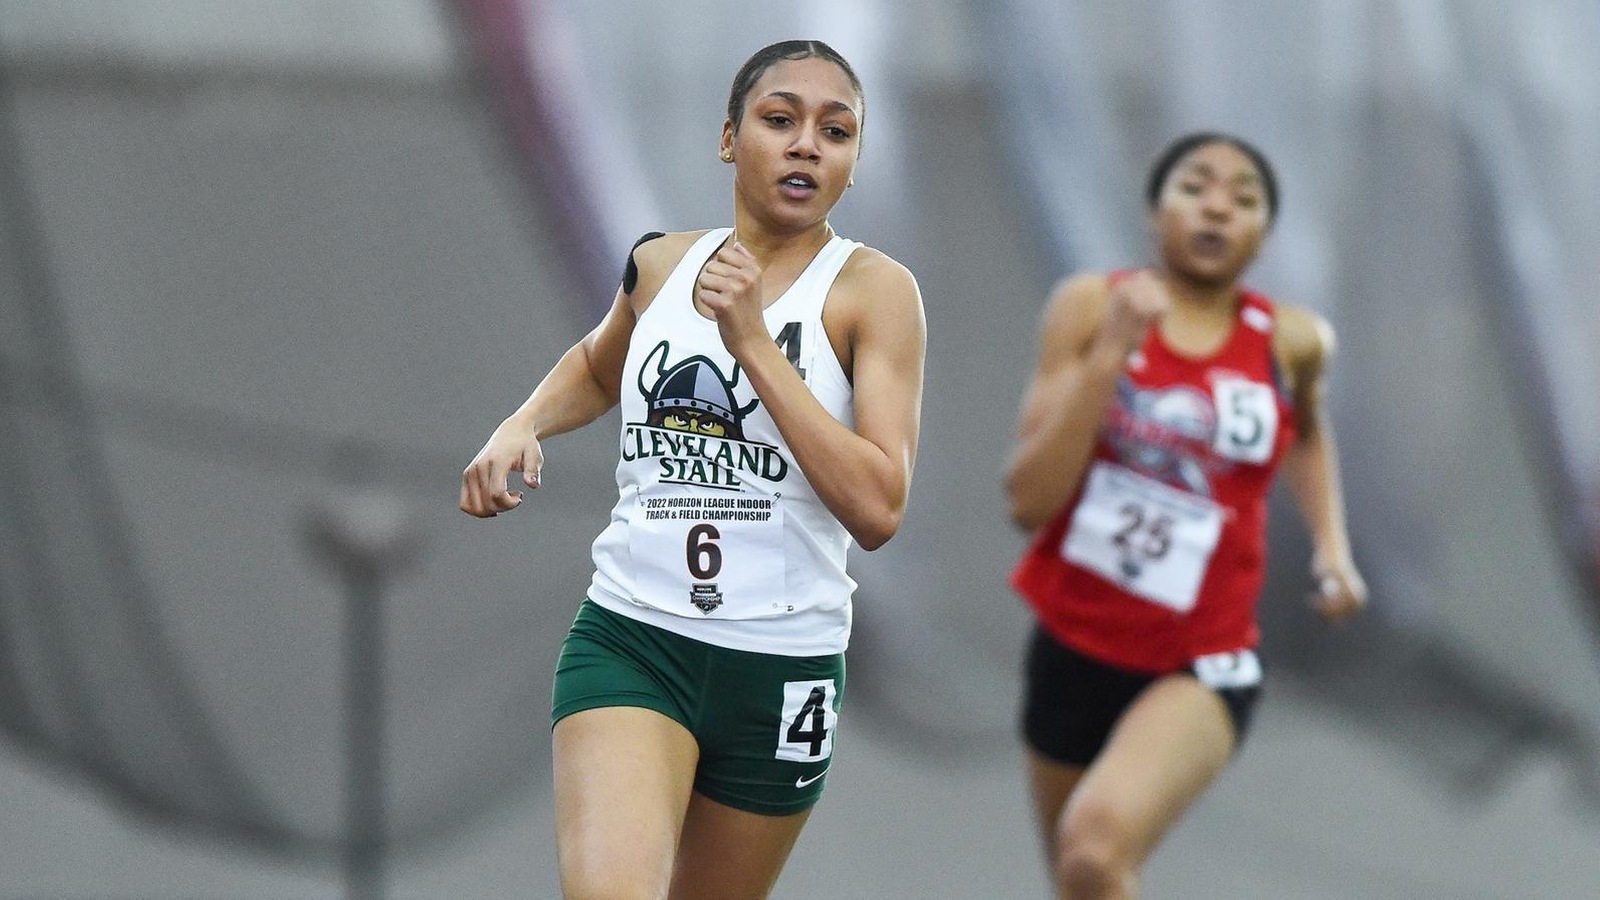 Cleveland State Track & Field Has Strong Showing At Mastodon Invitational